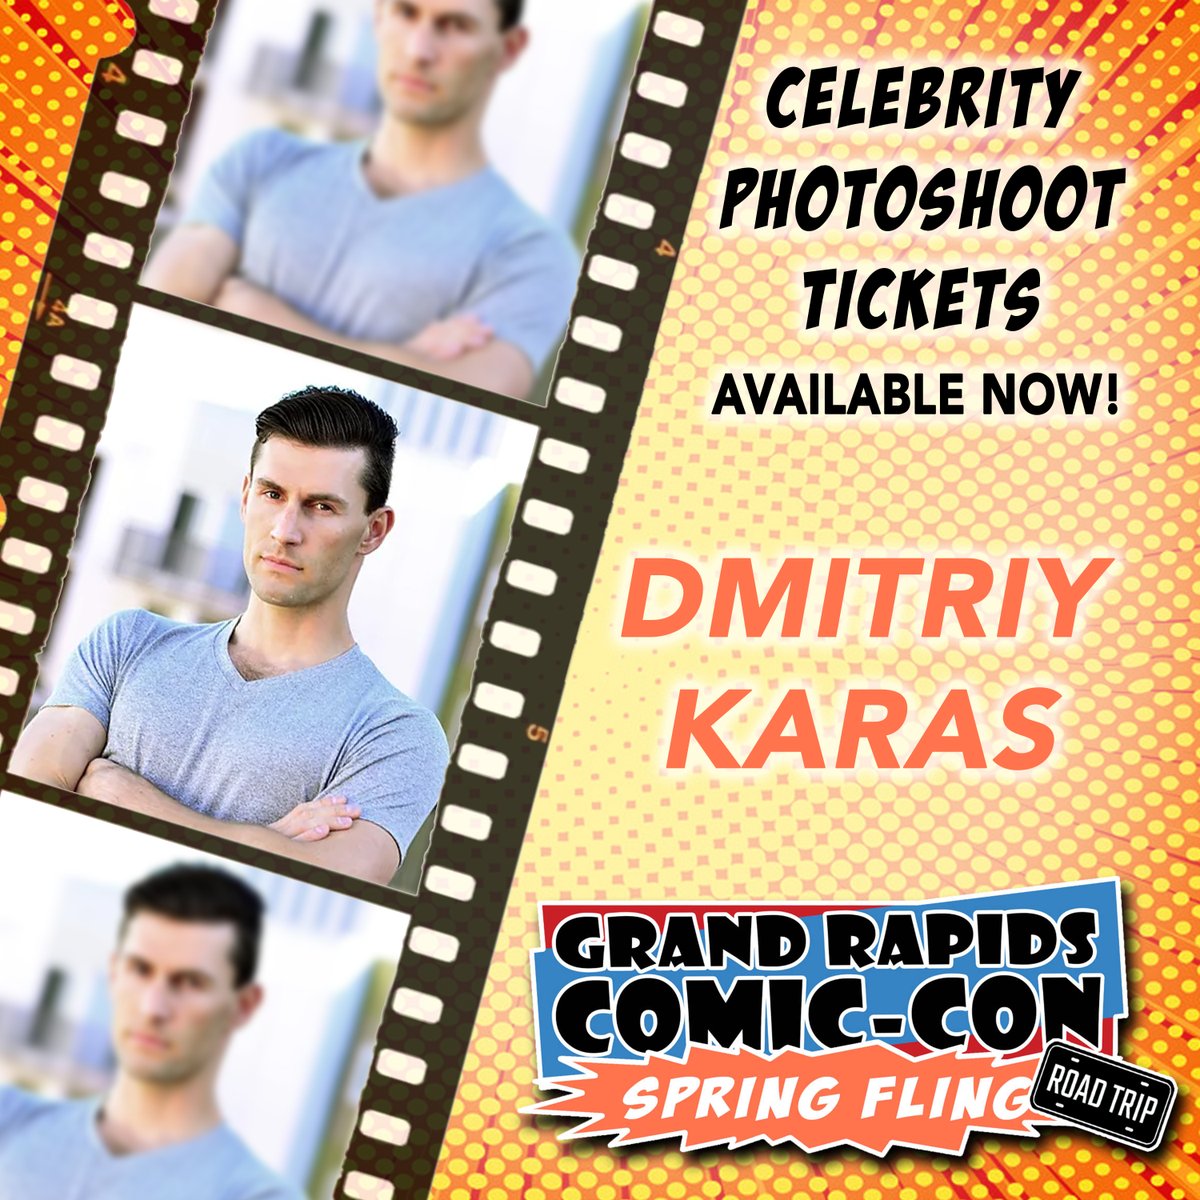 Celebrity Photoshoot tickets are available for pre-order NOW! Beat the lines and get yours online today! bit.ly/3TBPPUj